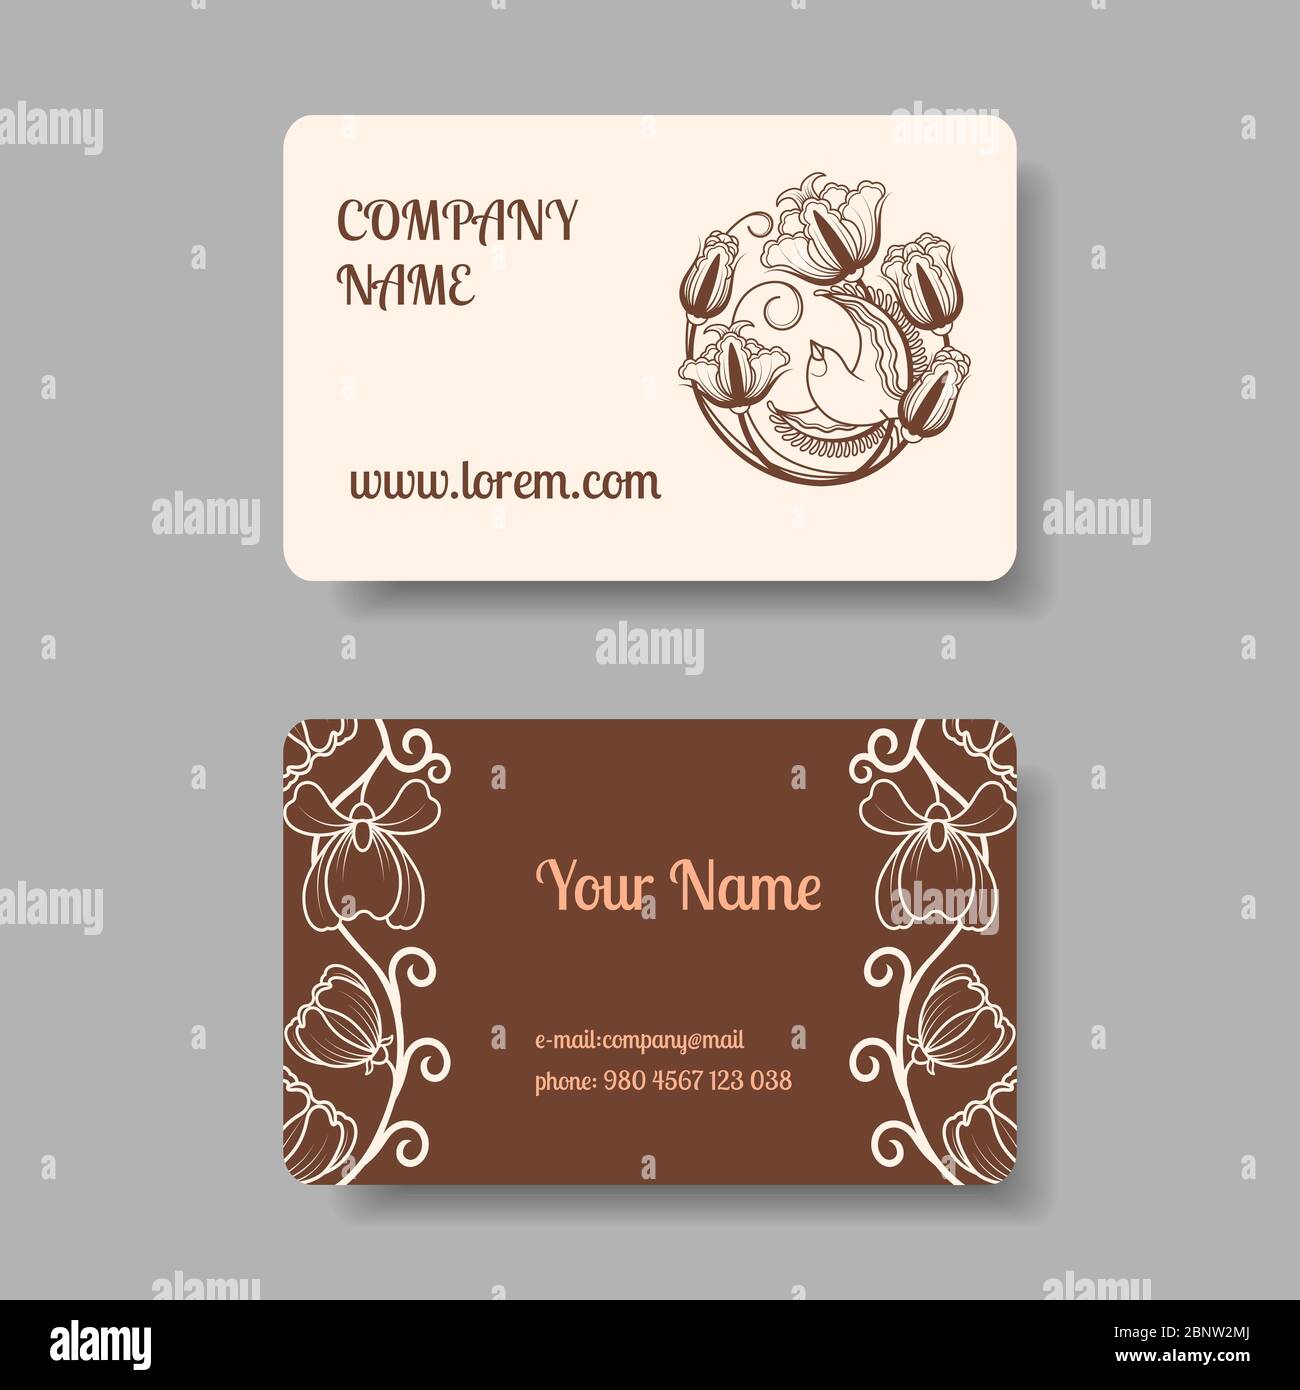 Vintage business card collection with floral ornament. Vector illustration Stock Vector